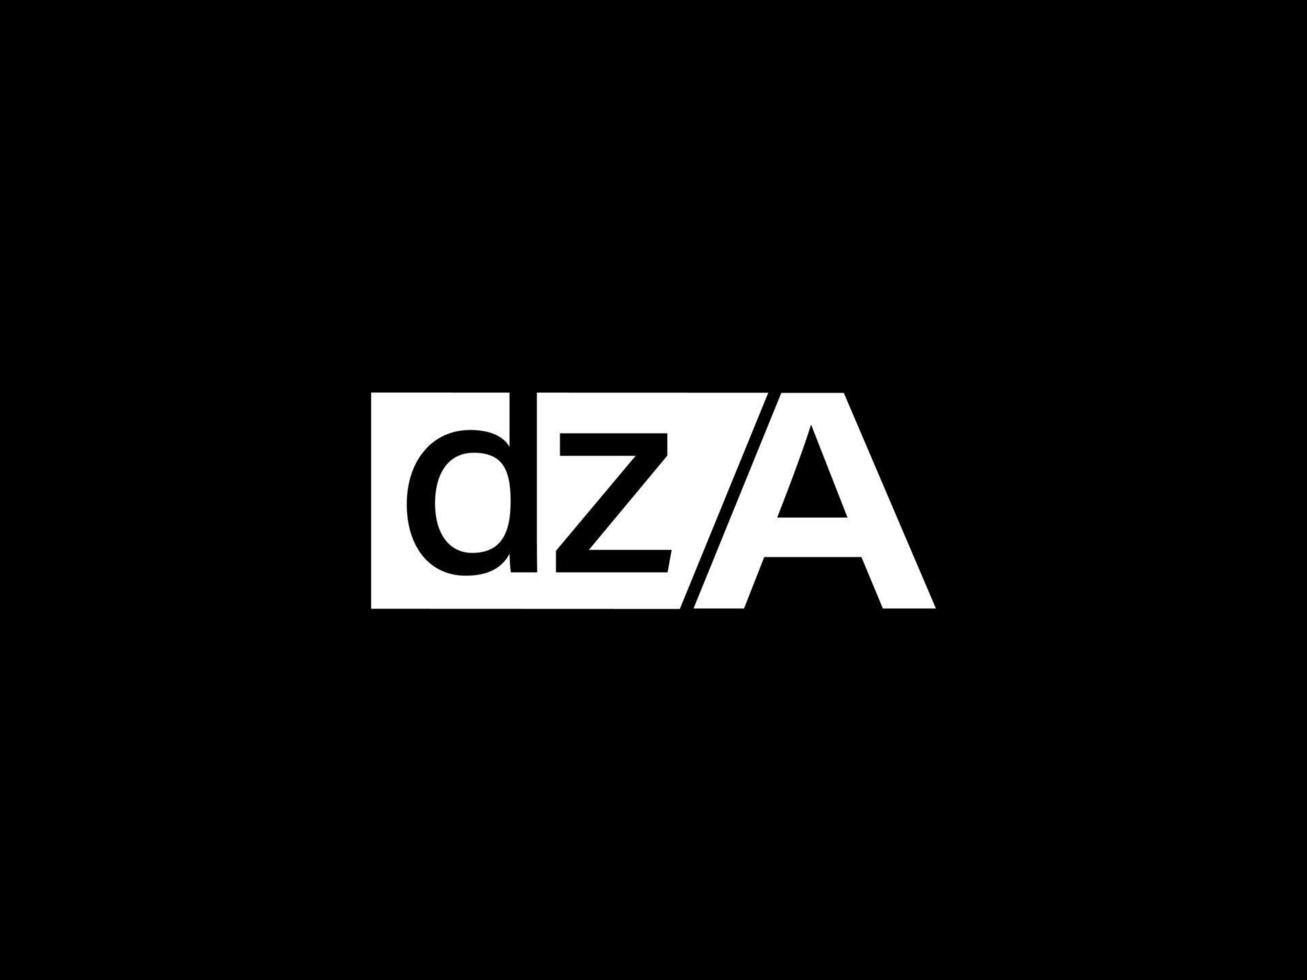 DZA Logo and Graphics design vector art, Icons isolated on black background